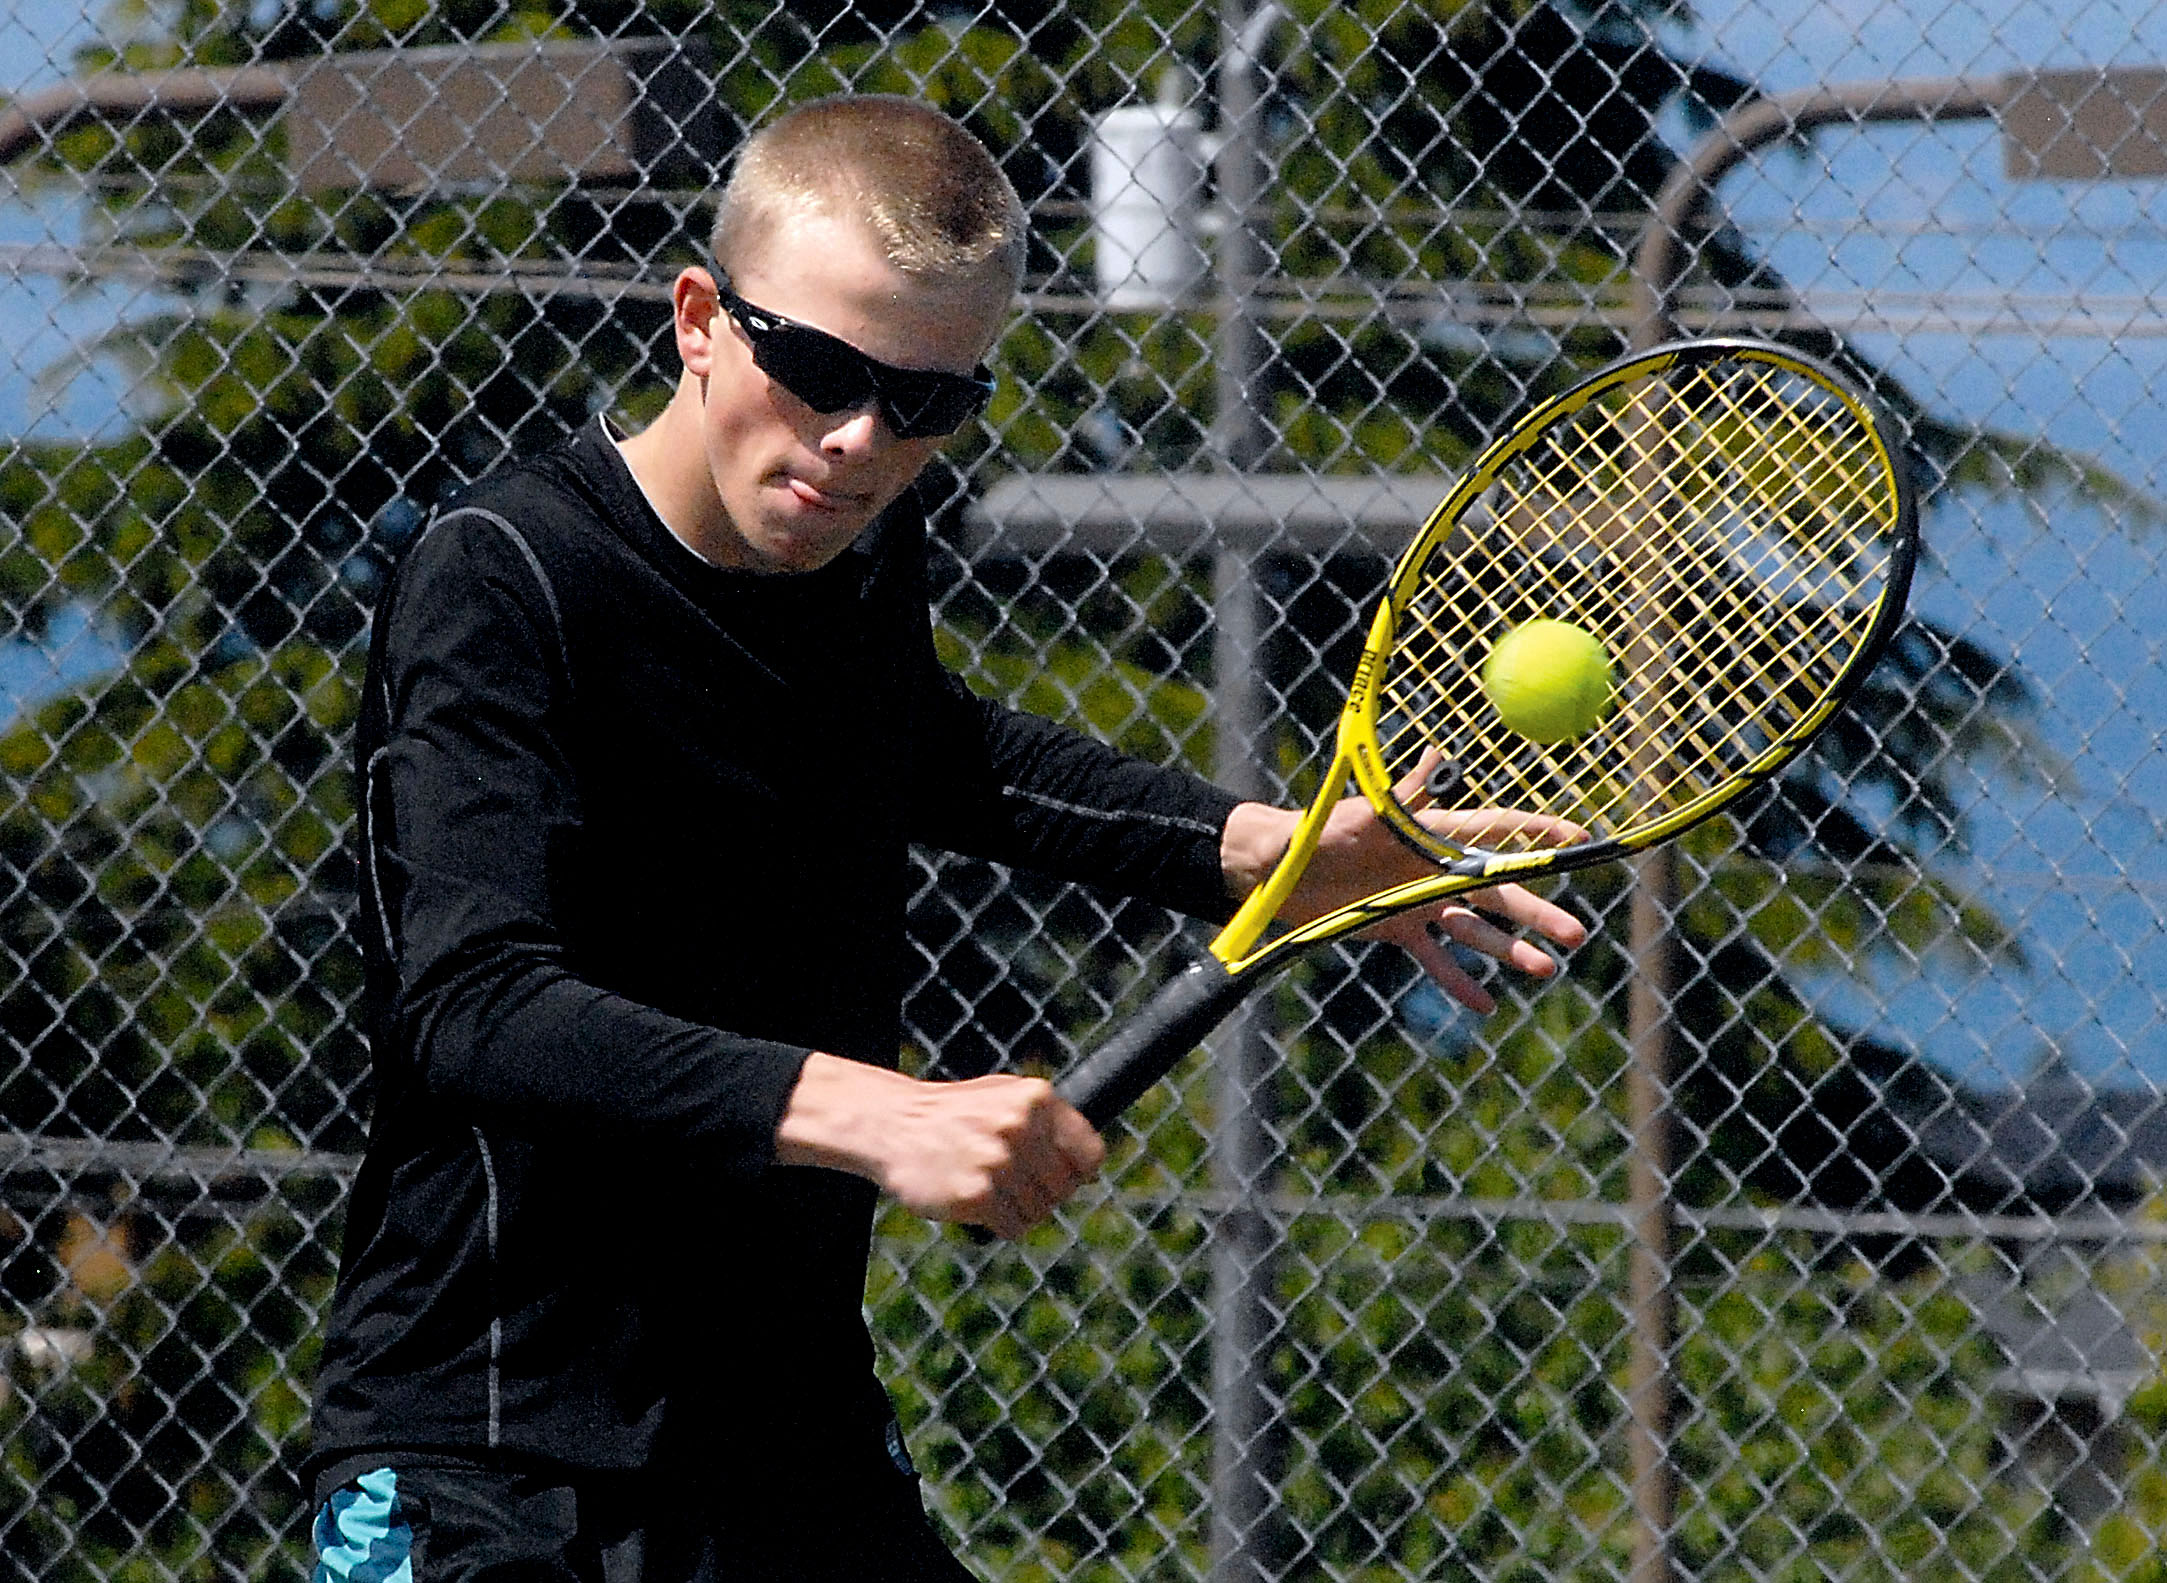 Port Angeles' Janson Pederson practices at the high school's tennis courts earlier this week in preparation for state competition. (Keith Thorpe/Peninsula Daily News)